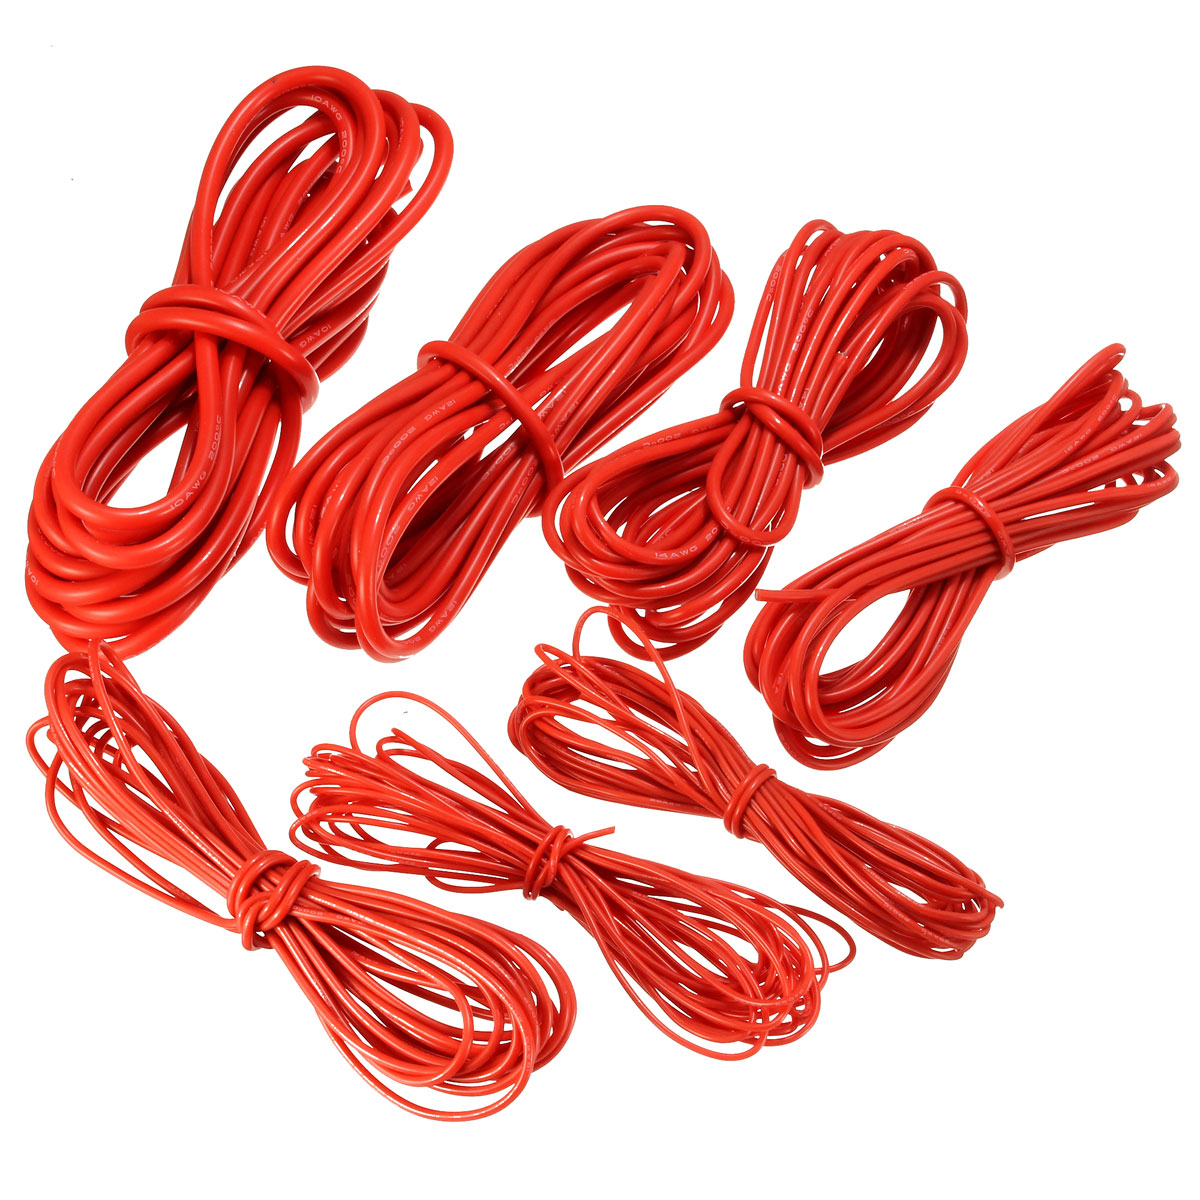 DANIU-5-Meter-Red-Silicone-Wire-Cable-10121416182022AWG-Flexible-Cable-1170292-1